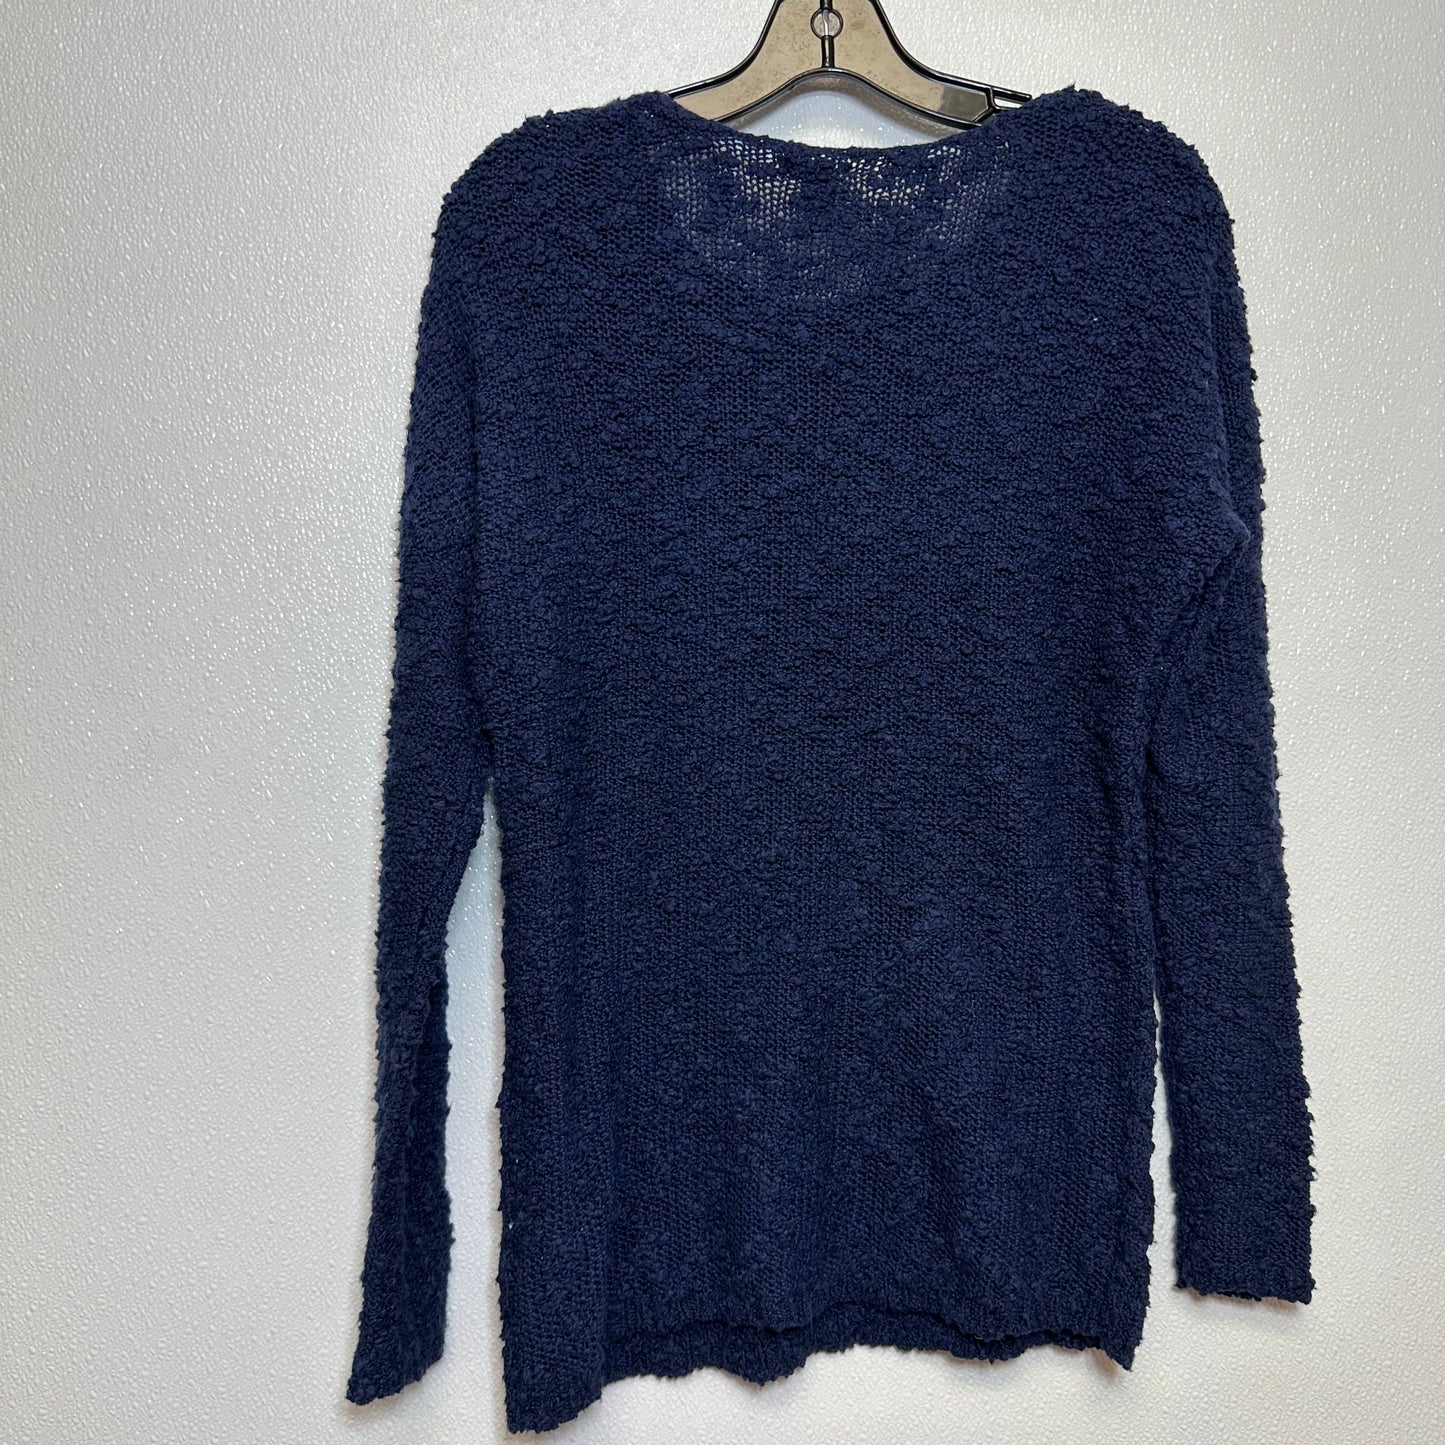 Sweater By Sonoma  Size: Xs